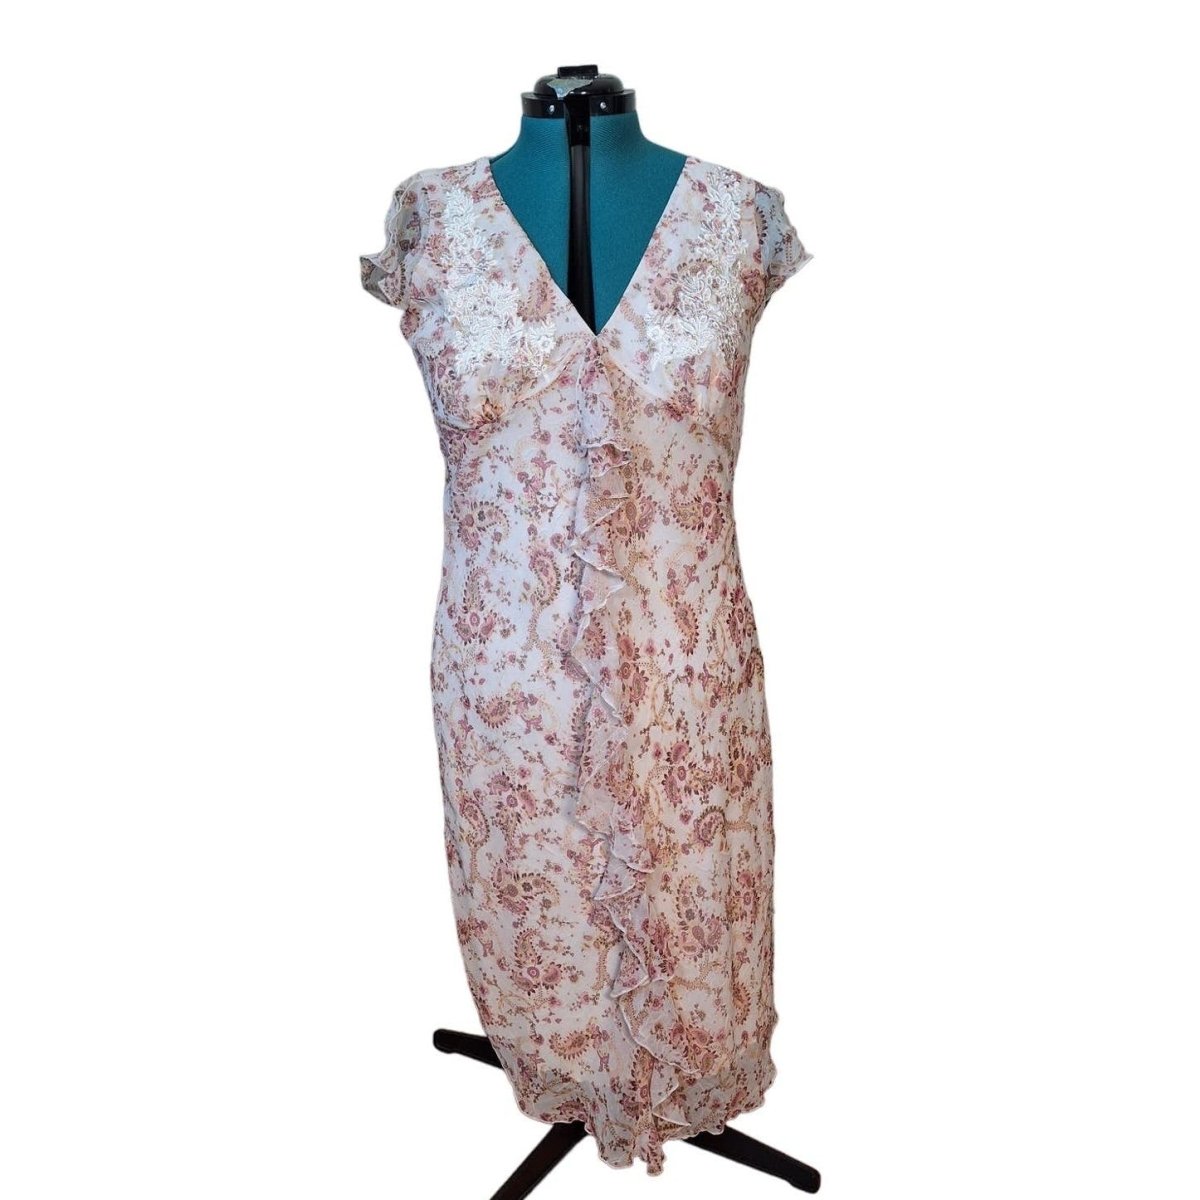 Vintage 90s/Y2K Cream & Pink Paisley Sheer Layer Midi Dress Women Size 14 L/XL - themallvintage The Mall Vintage